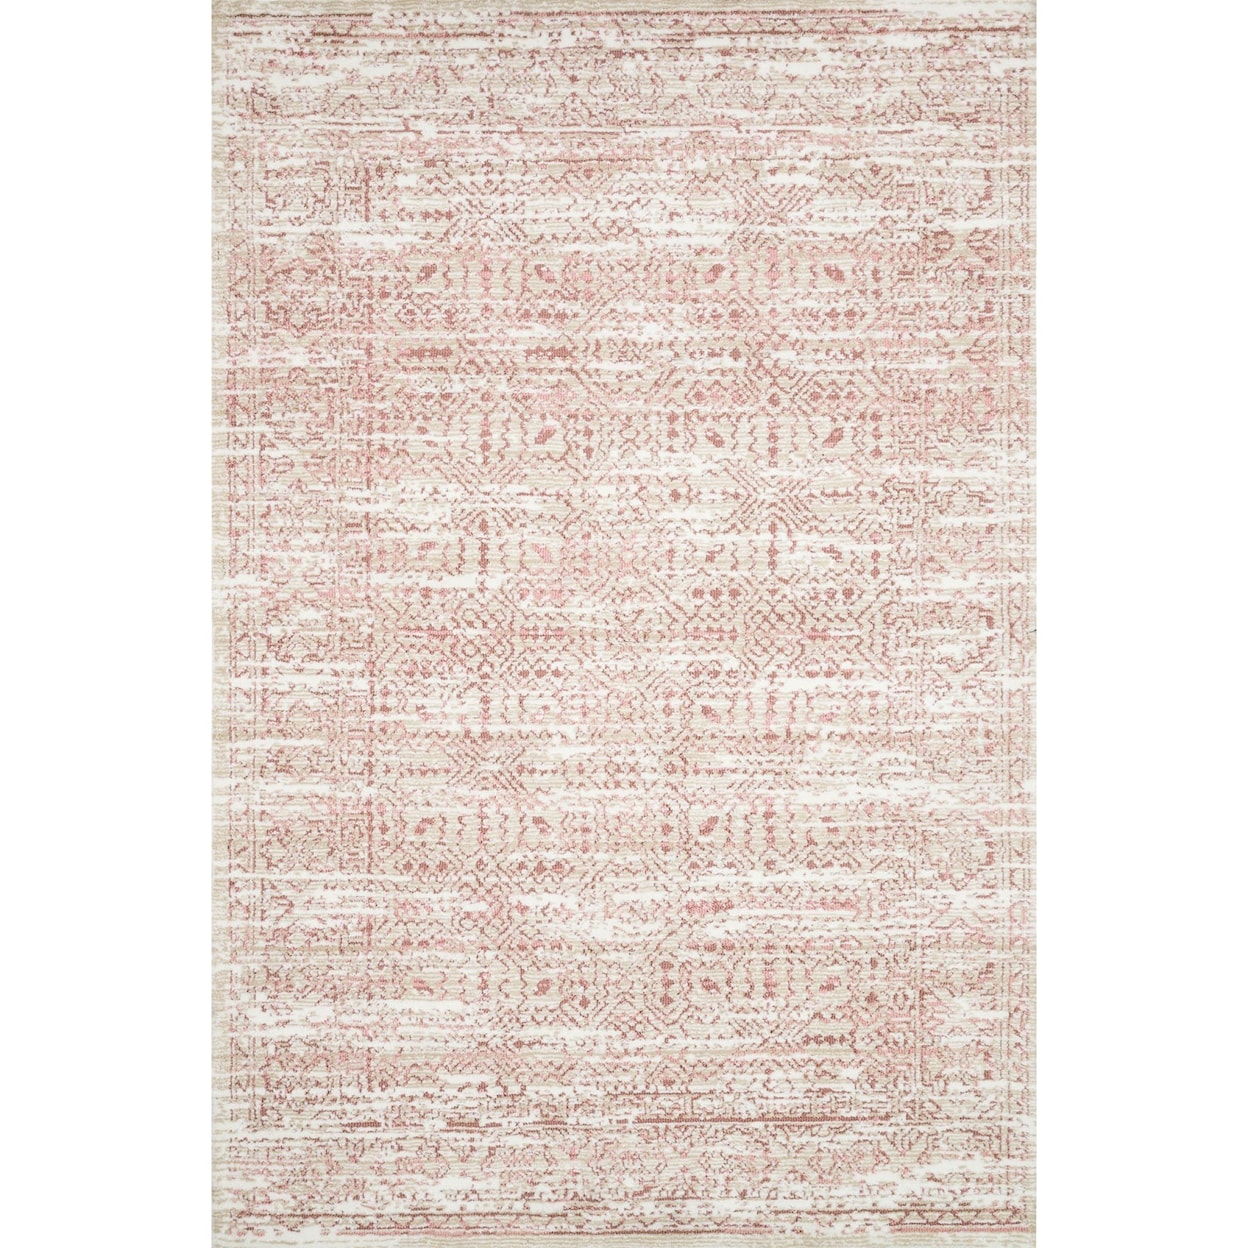 Magnolia Home by Joanna Gaines for Loloi Lotus 3'-6" x 5'-6" Rug